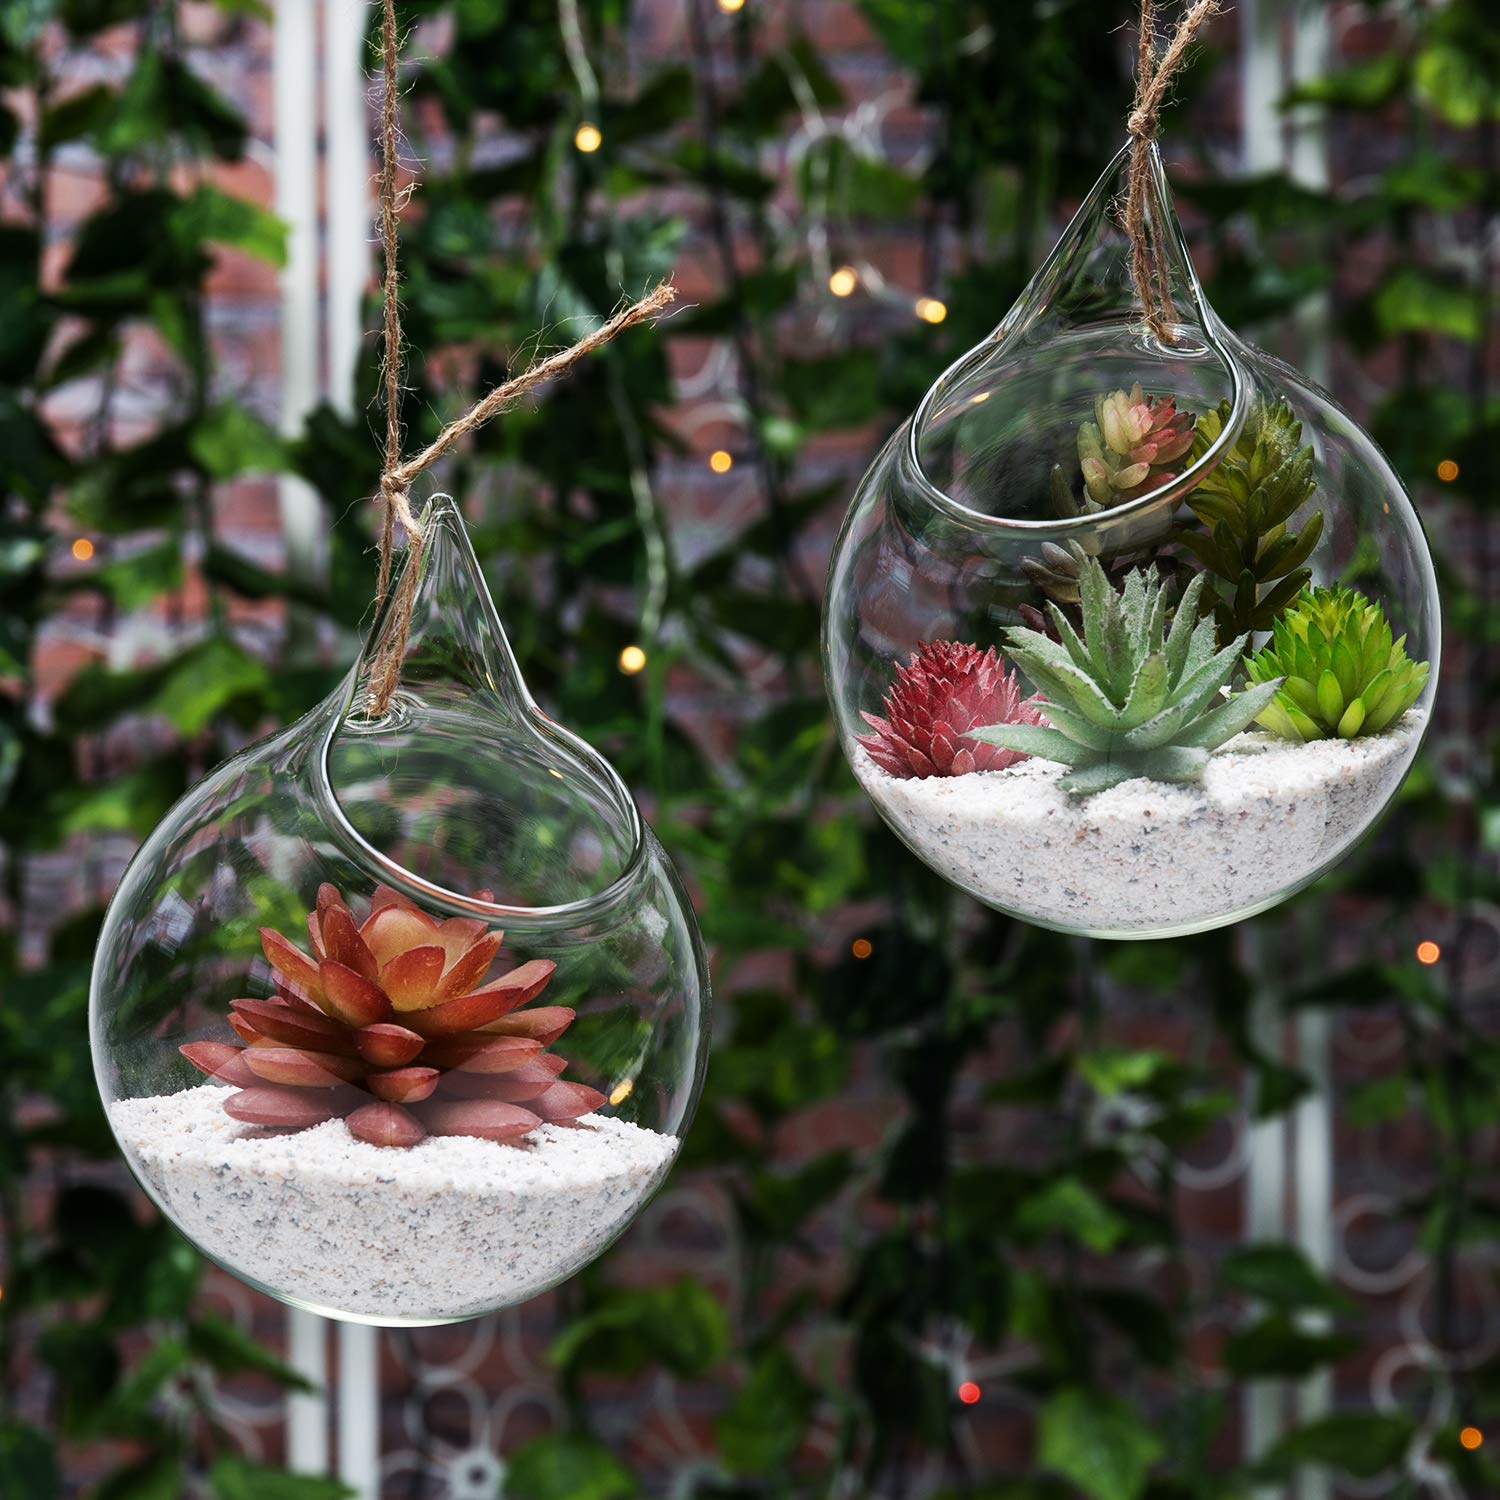 Two glass terrariums hanging from strings